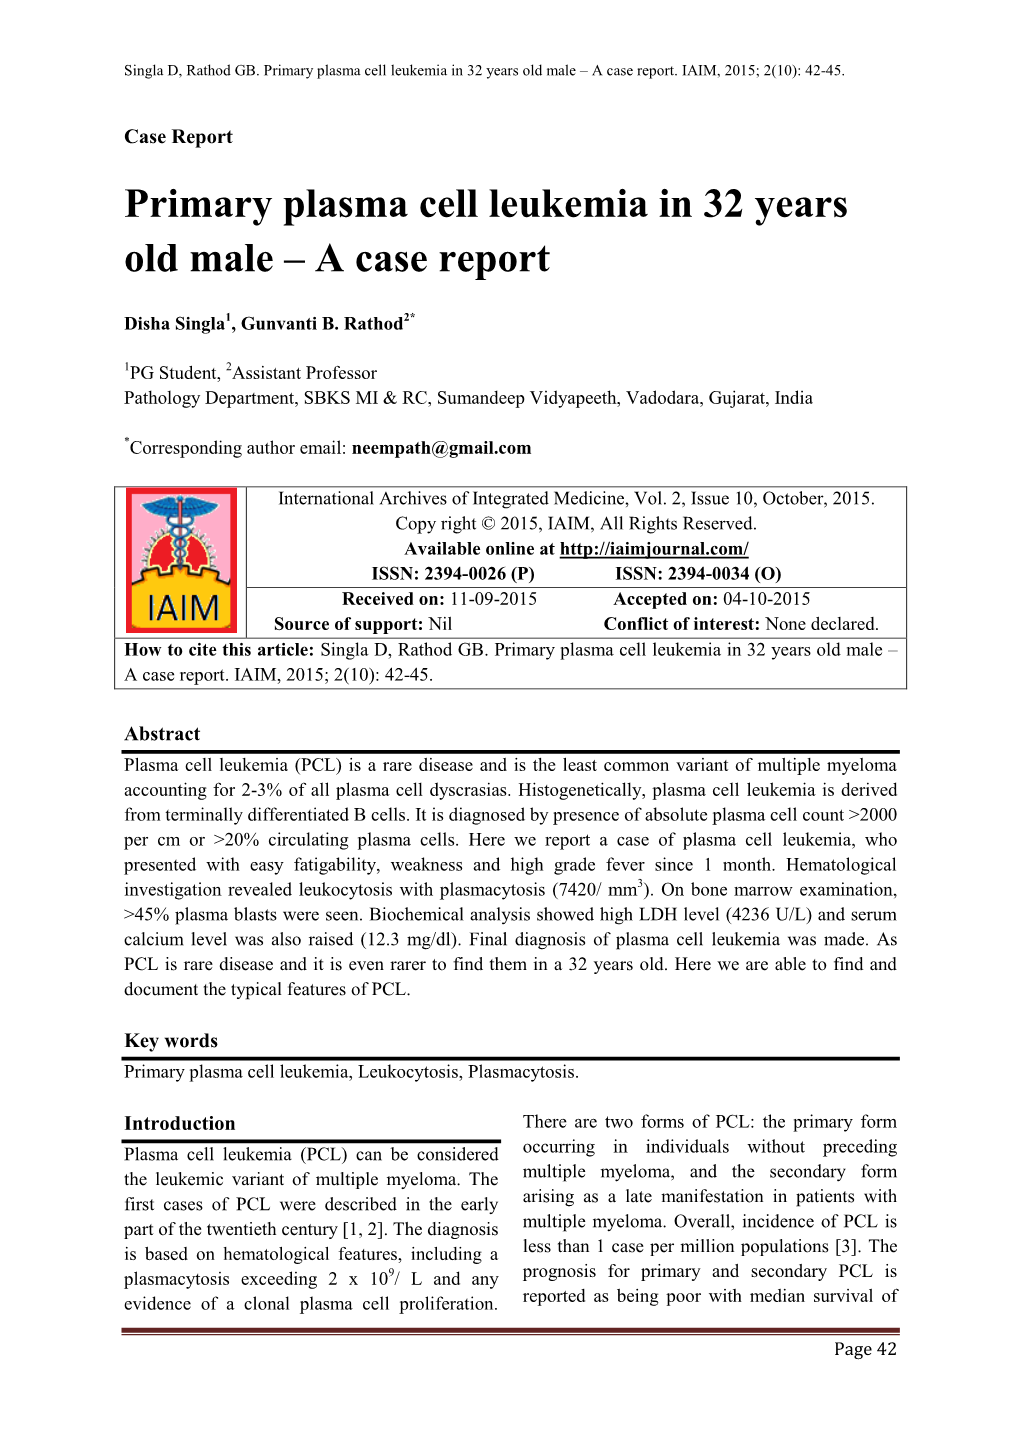 Primary Plasma Cell Leukemia in 32 Years Old Male – a Case Report